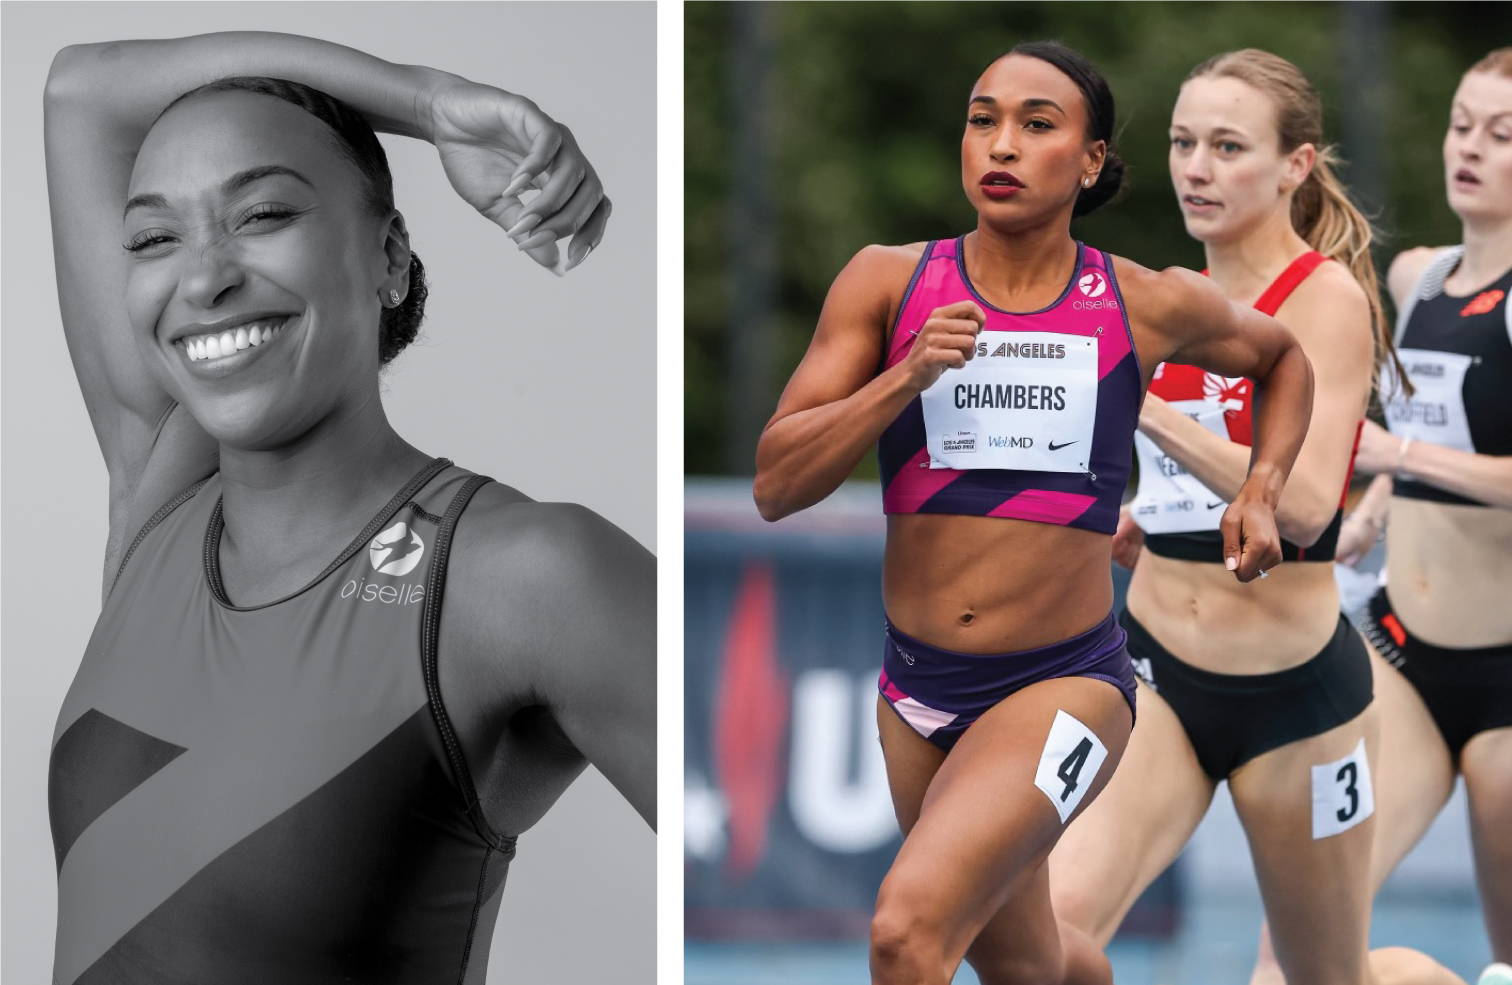 Left: Portrait of Kendra Coleman in a Oiselle uniform. Right: Kendra racing the 800 meters